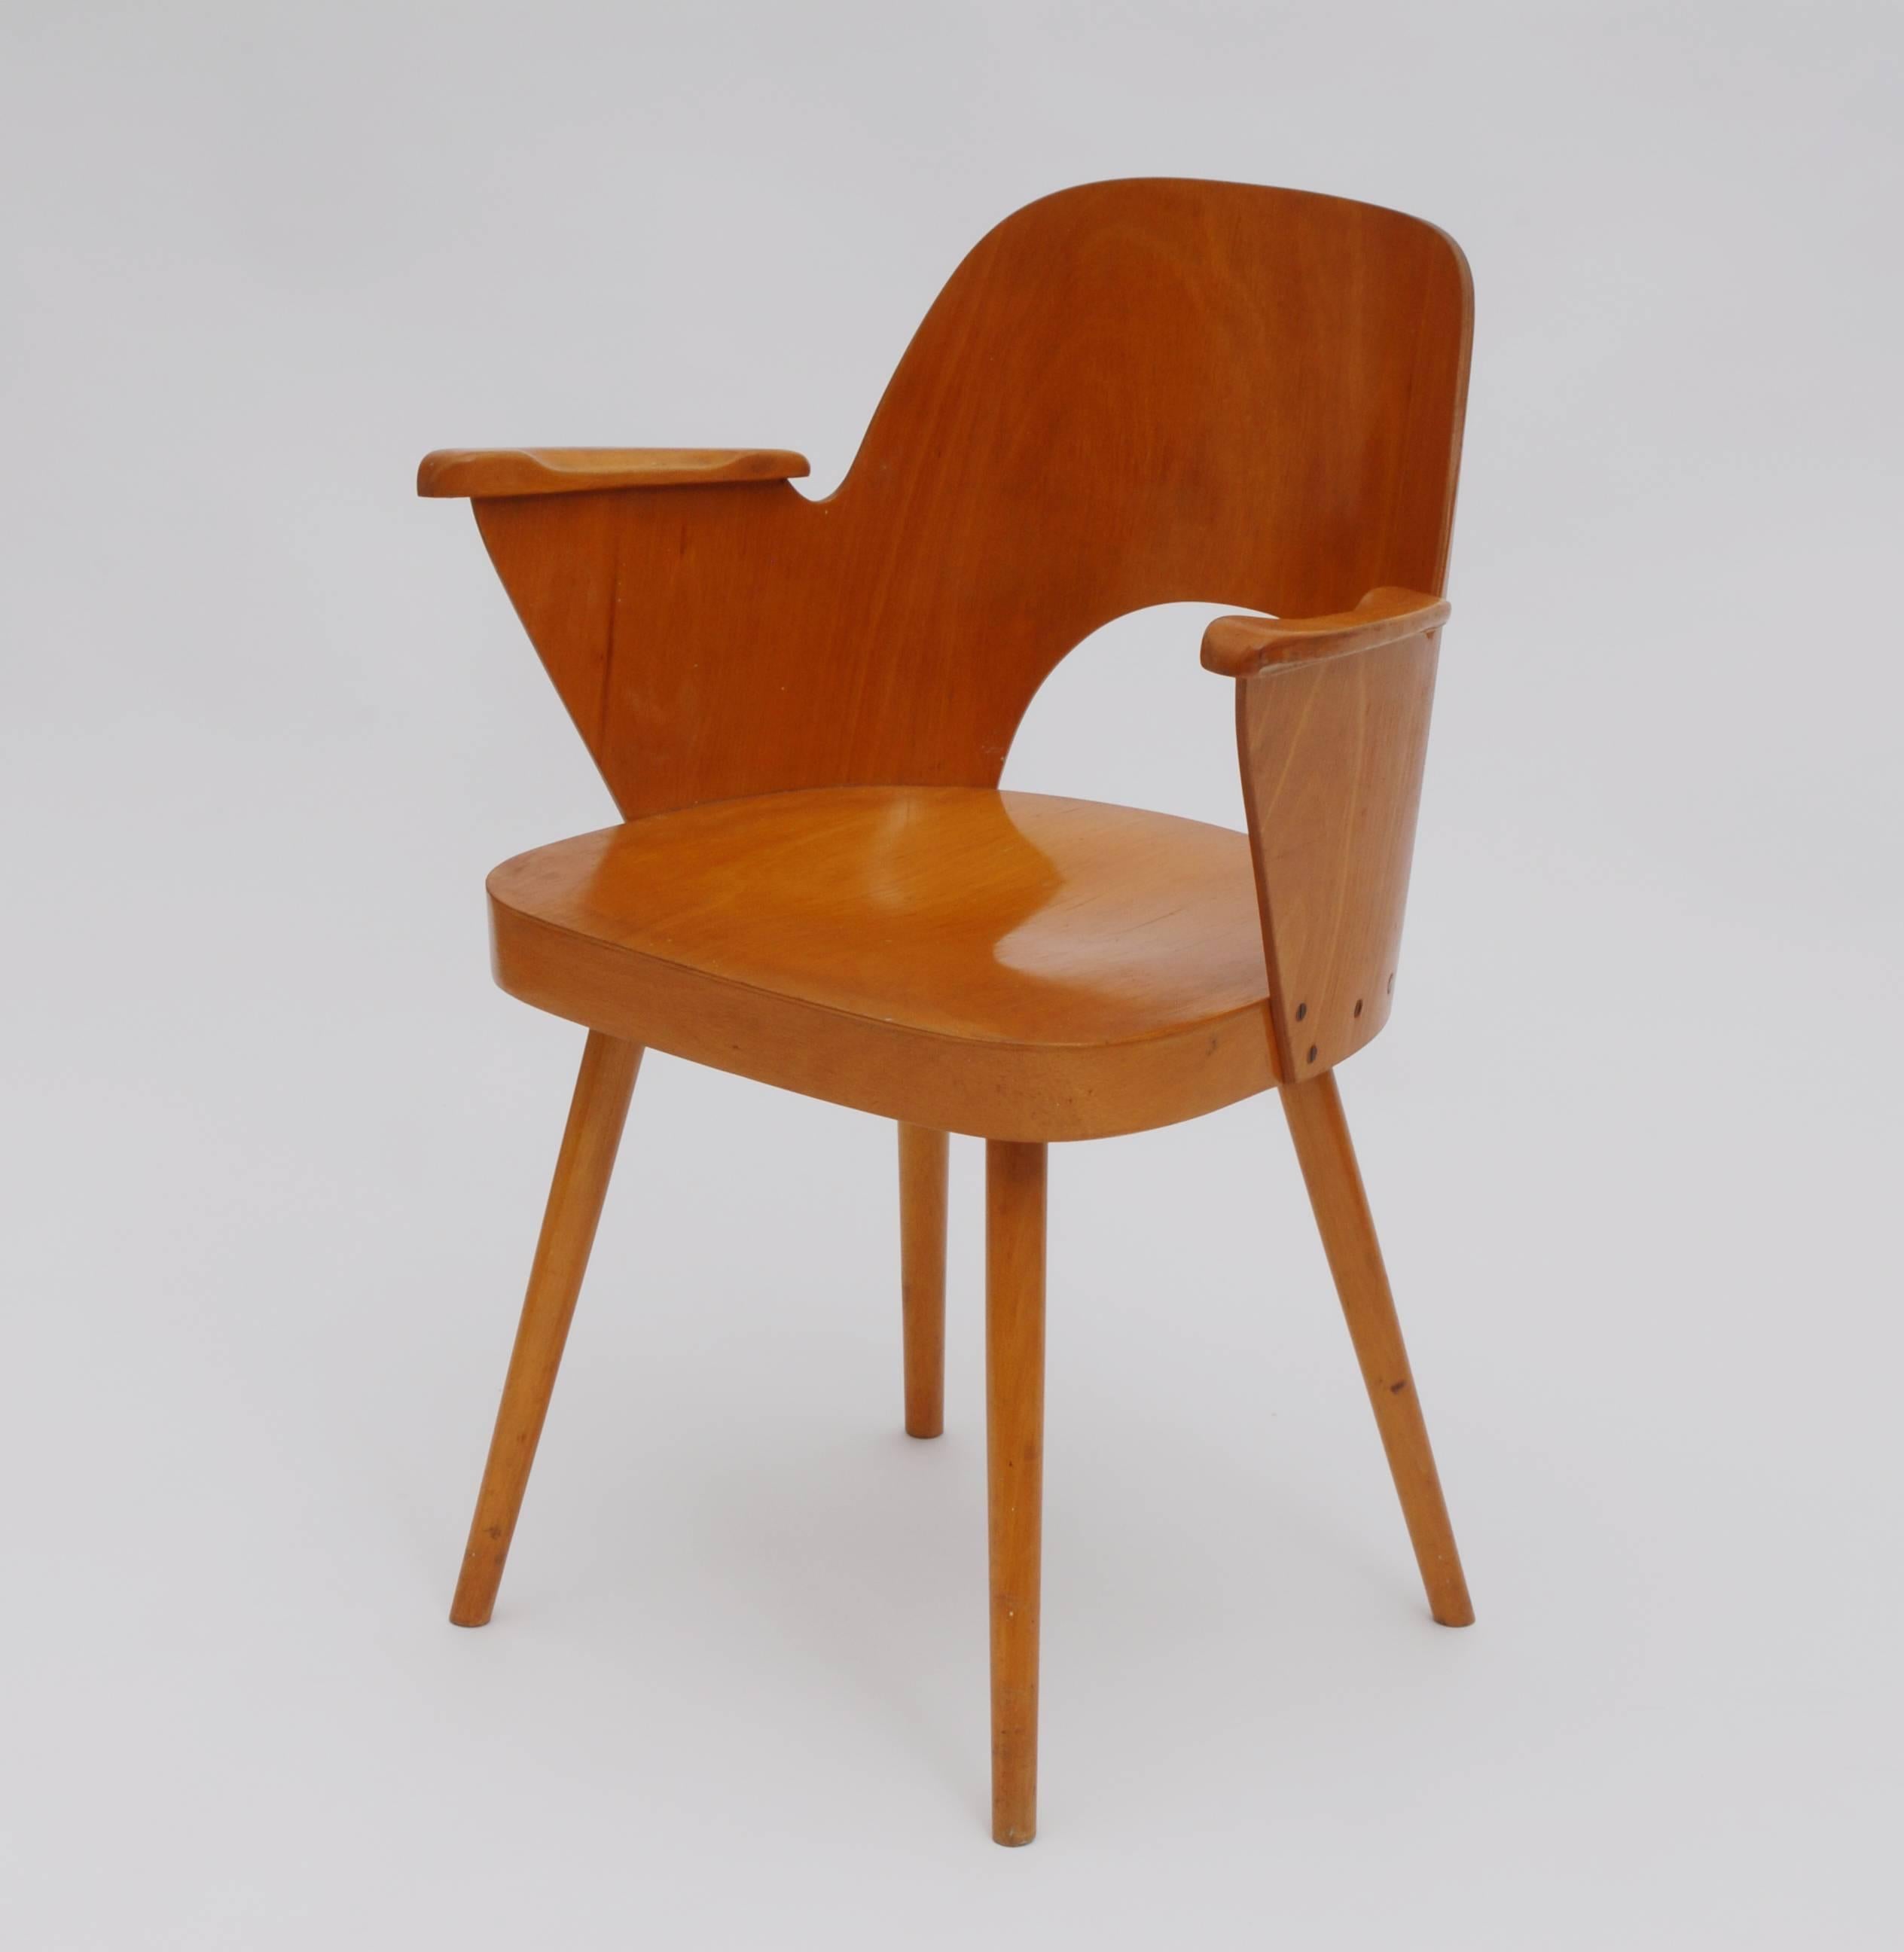 This wooden armchair with armrests was made in Czechoslovakia, circa 1960 by TON. Narodni podnik Bystrice pod Hostynem.
   